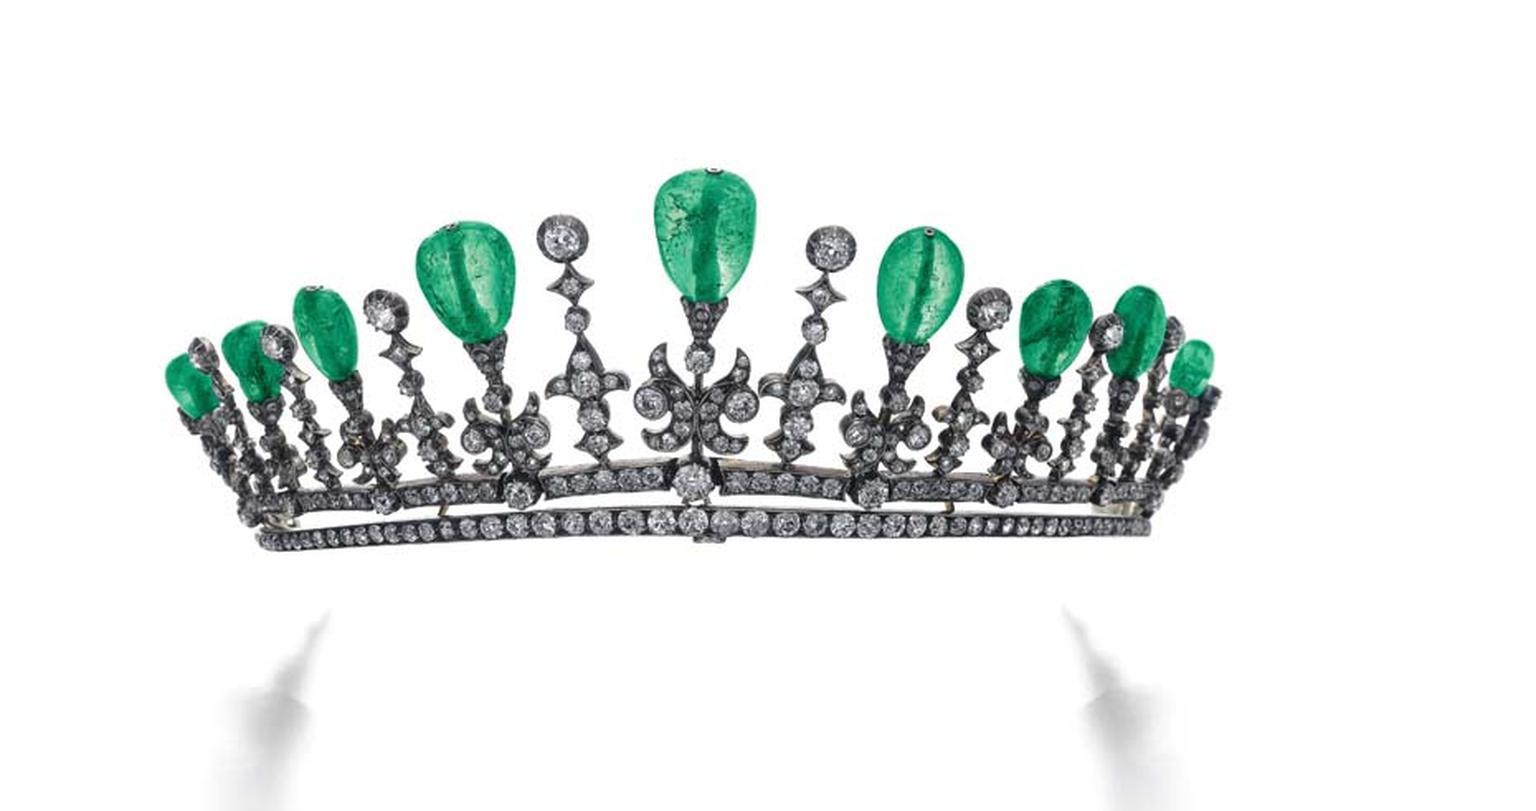 From the early 20th century, this elegant emerald and diamond tiara is one of five vintage tiaras that will go under the hammer at Sotheby’s Geneva next month as part of its Magnificent Jewels and Noble Jewels auction (estimate: $40-60,000).